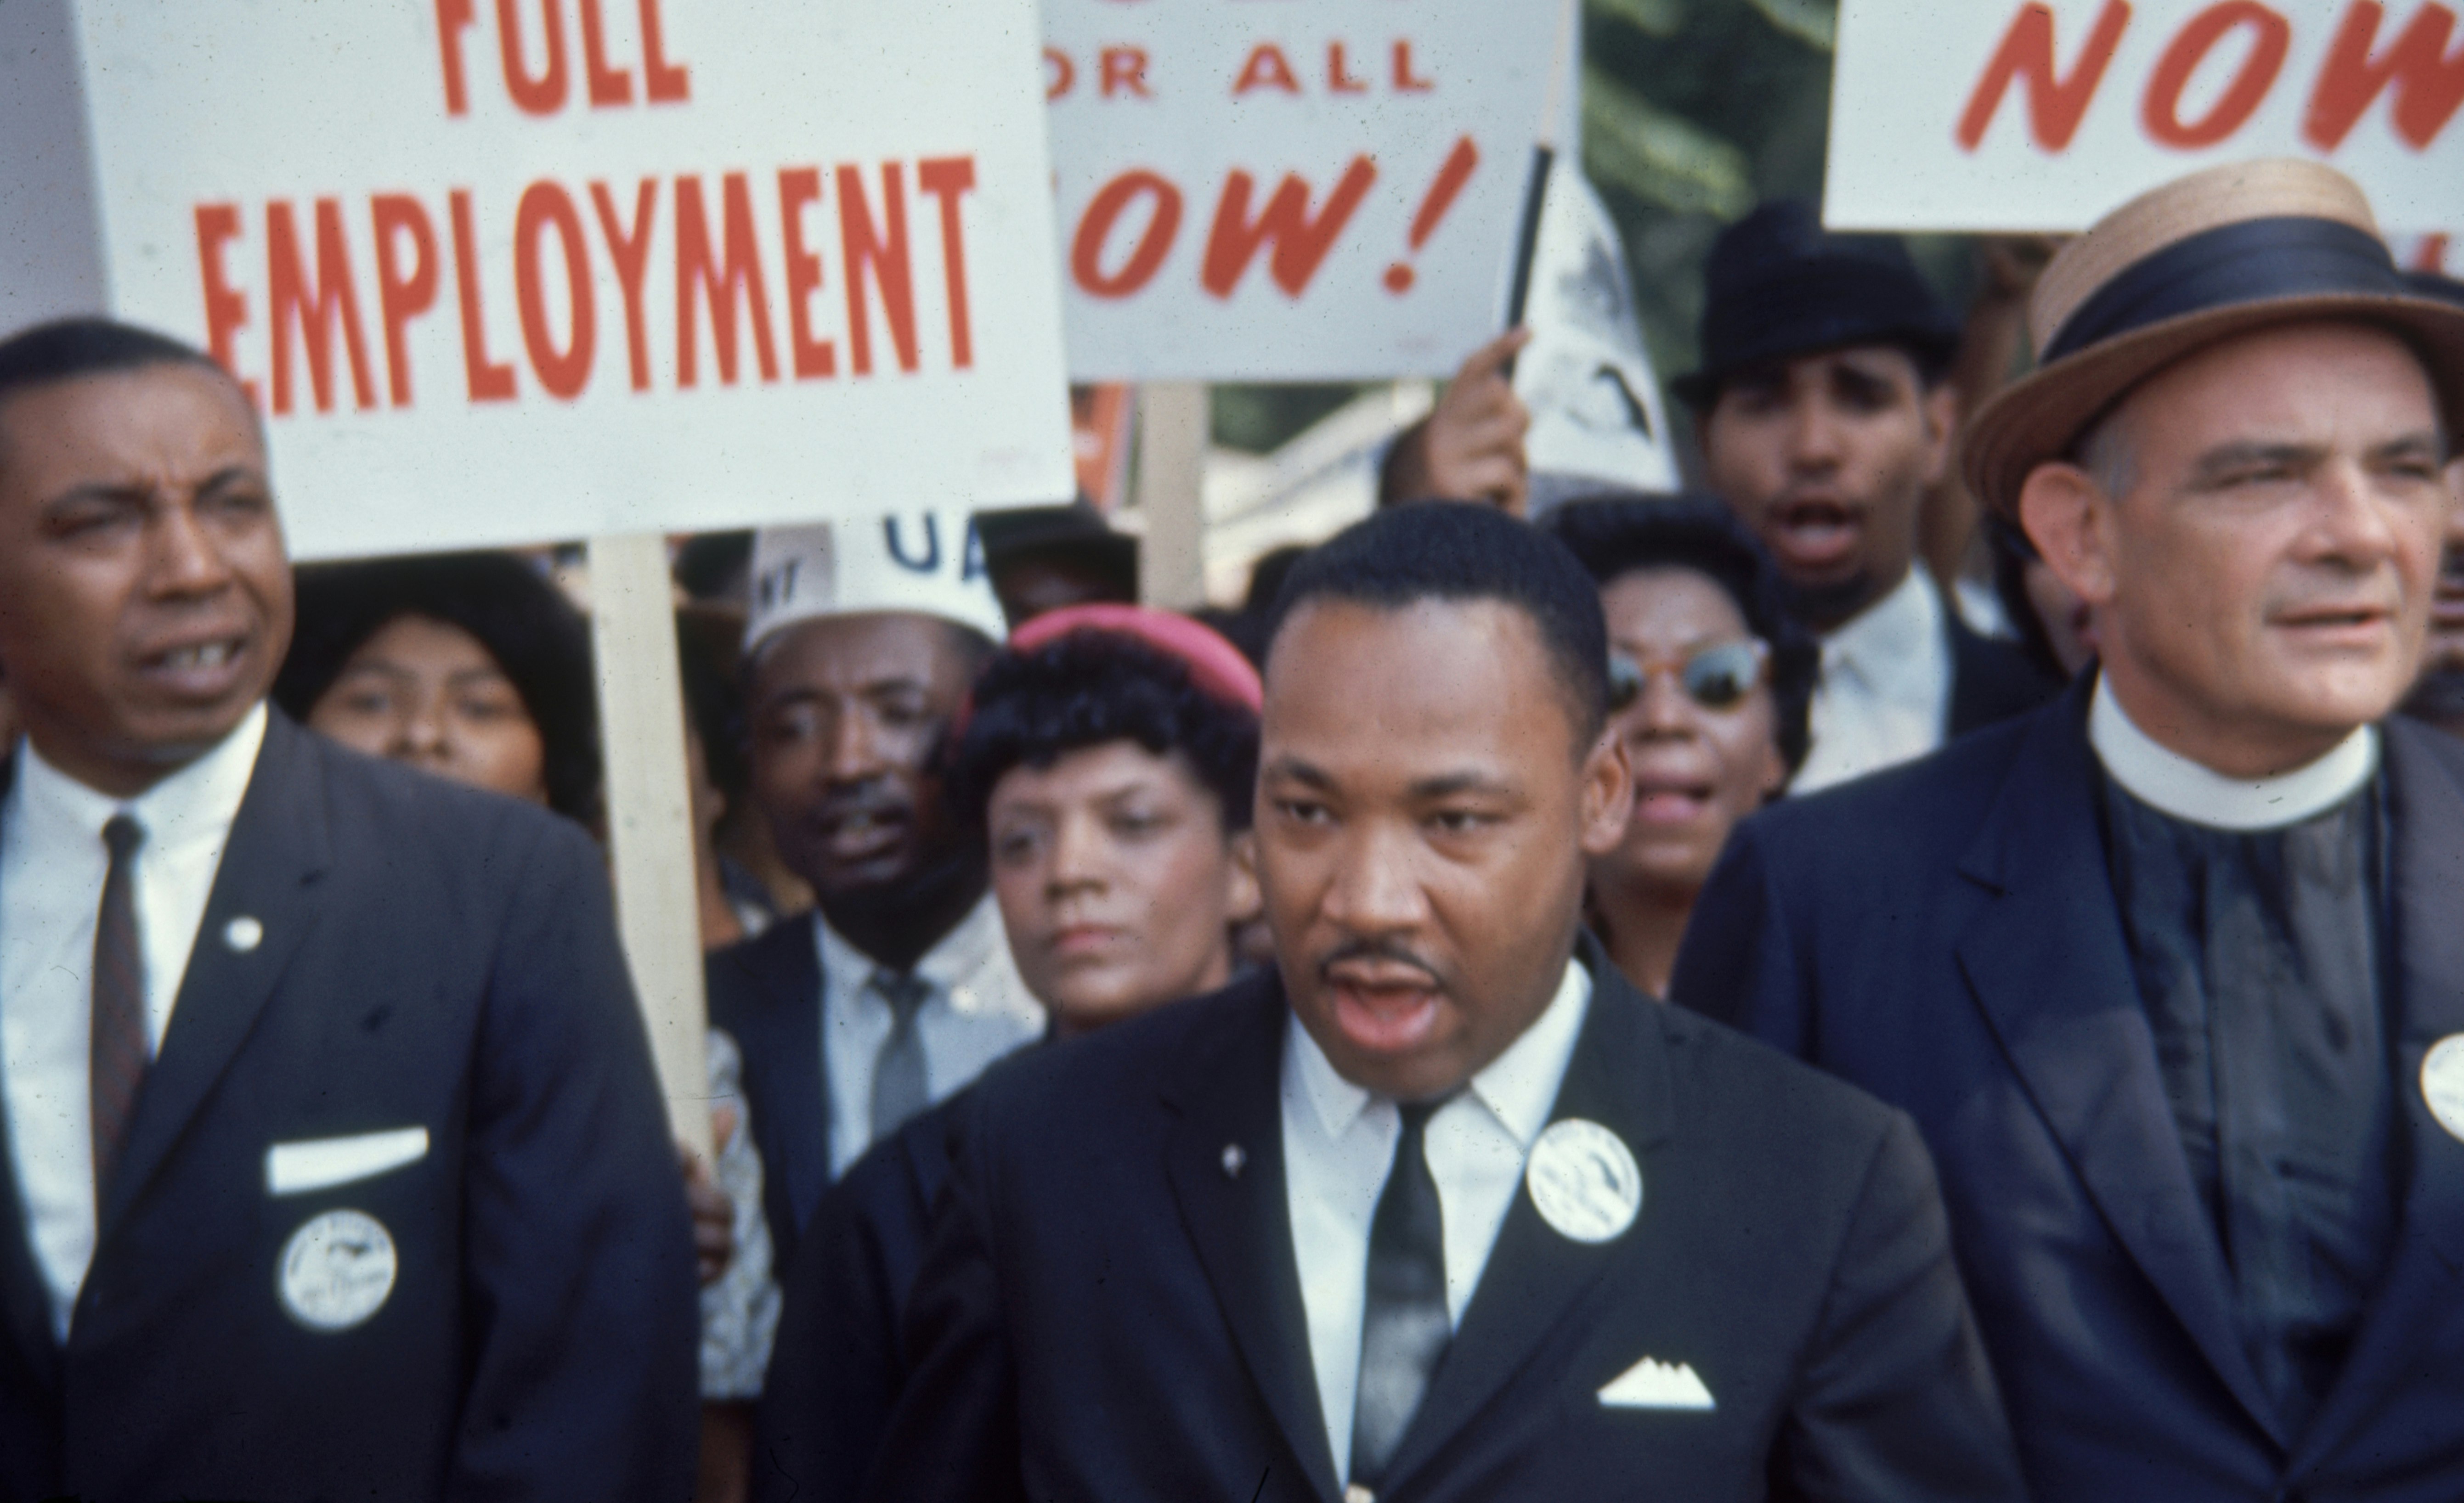 View of Martin Luther King Jr and some of the leaders of March on Washington for Jobs & Freedom 